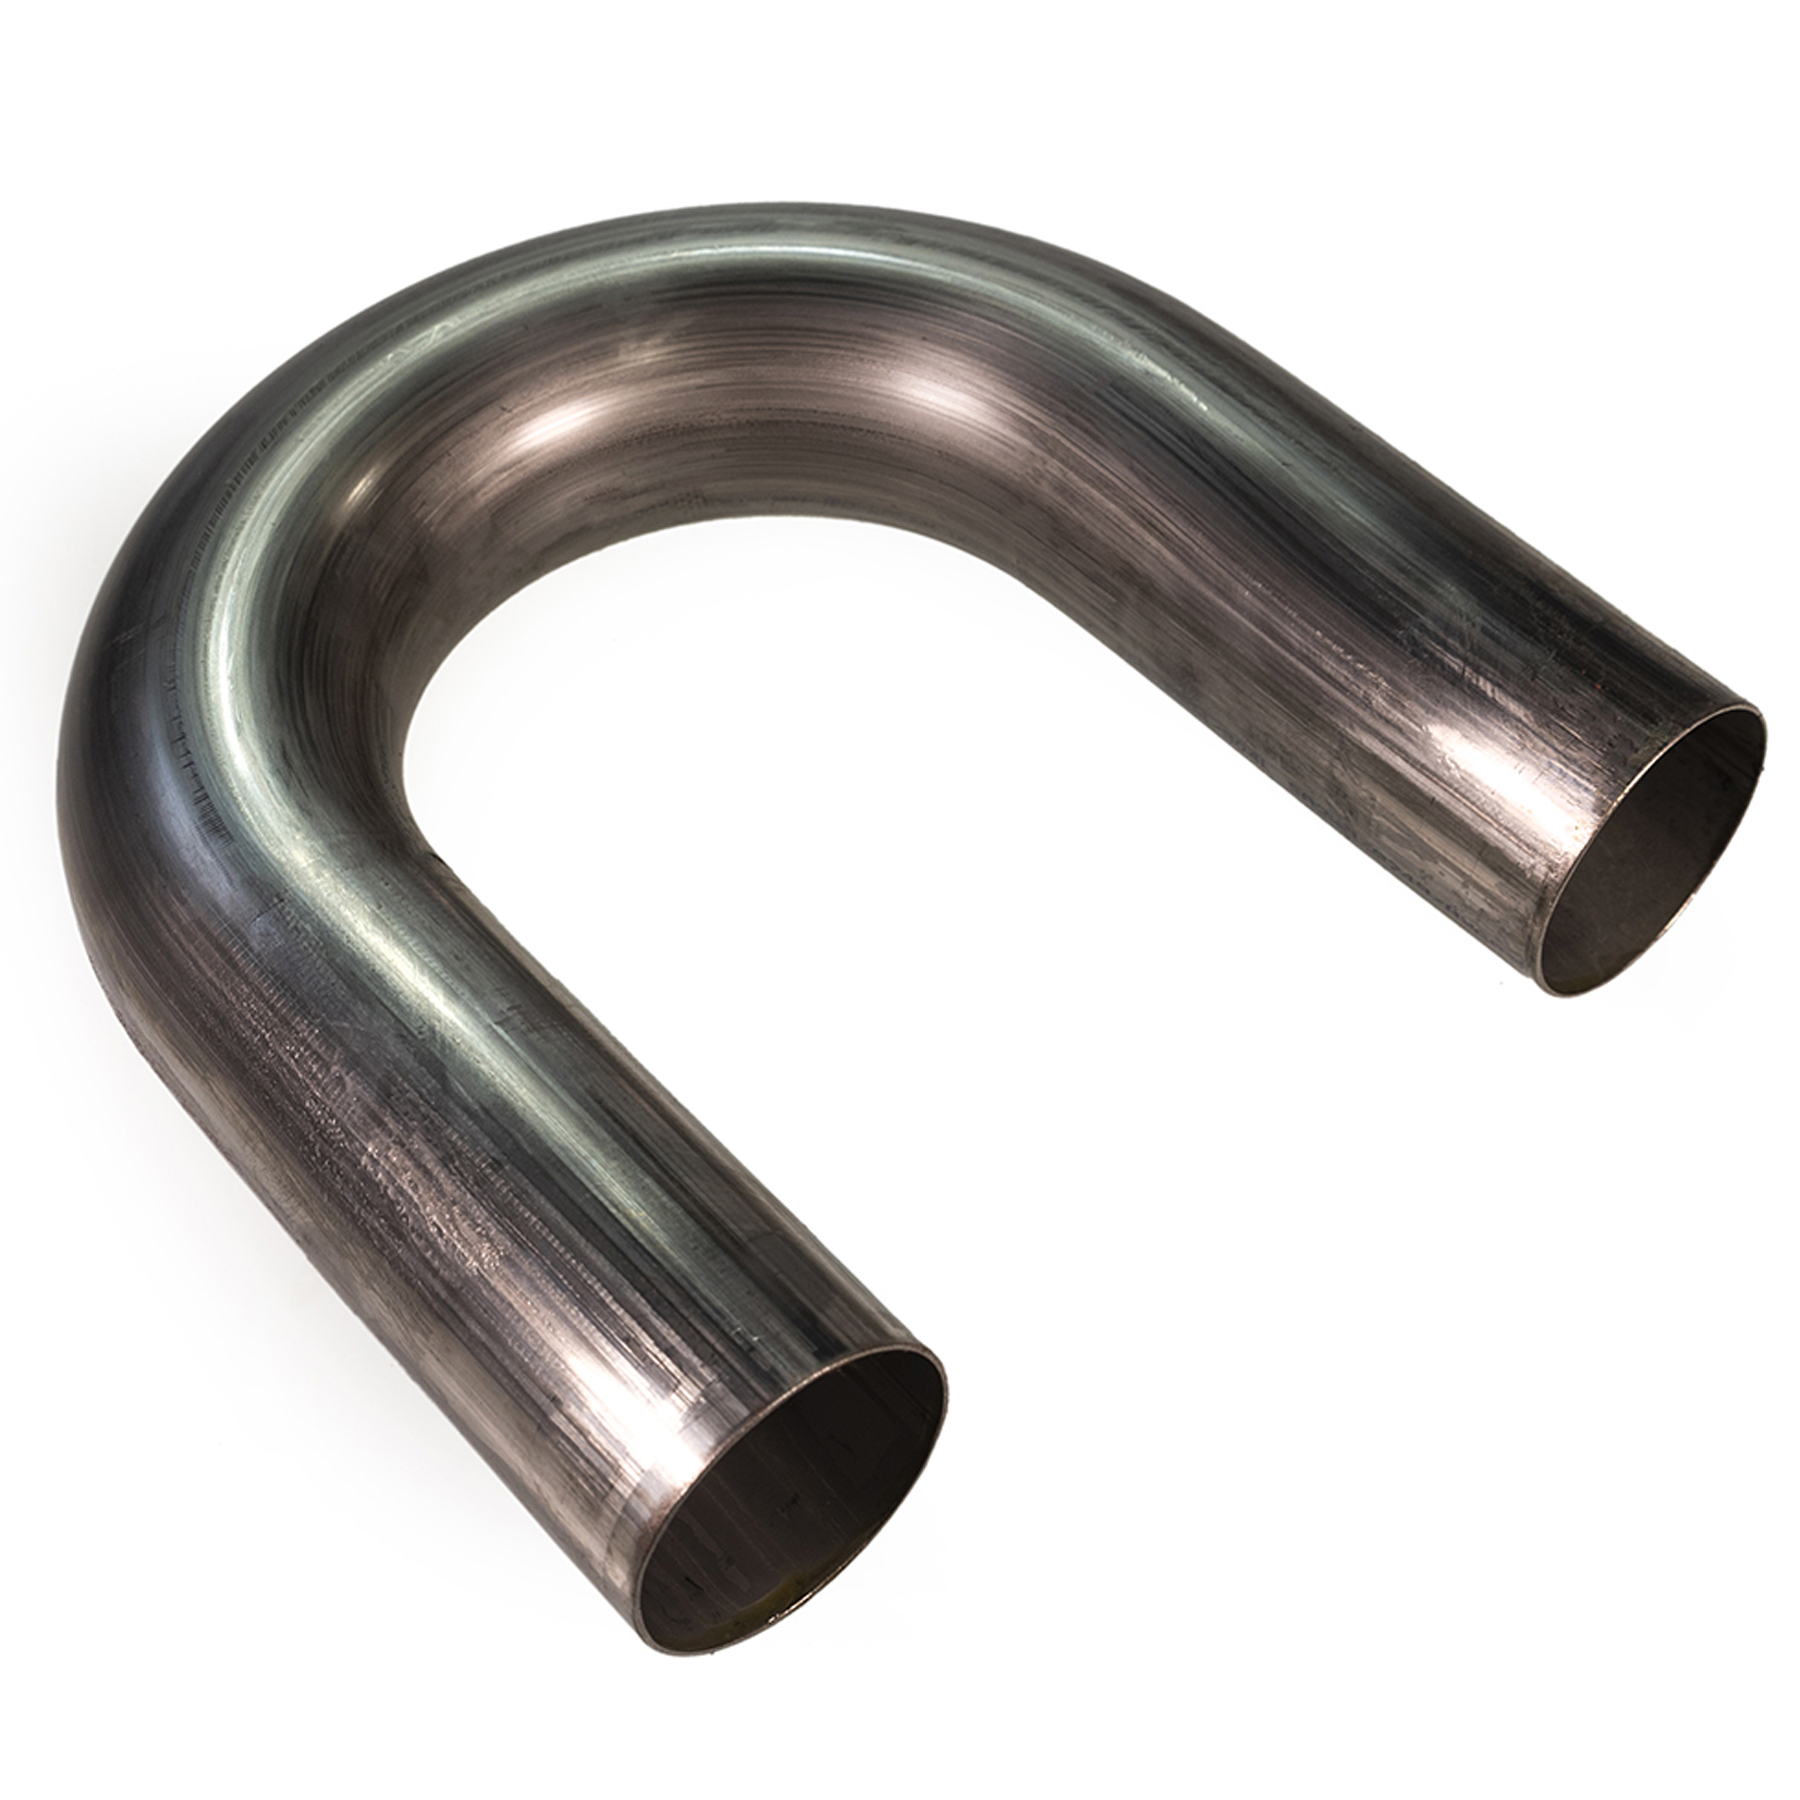 Customized Bend Nascent Fittings Inc